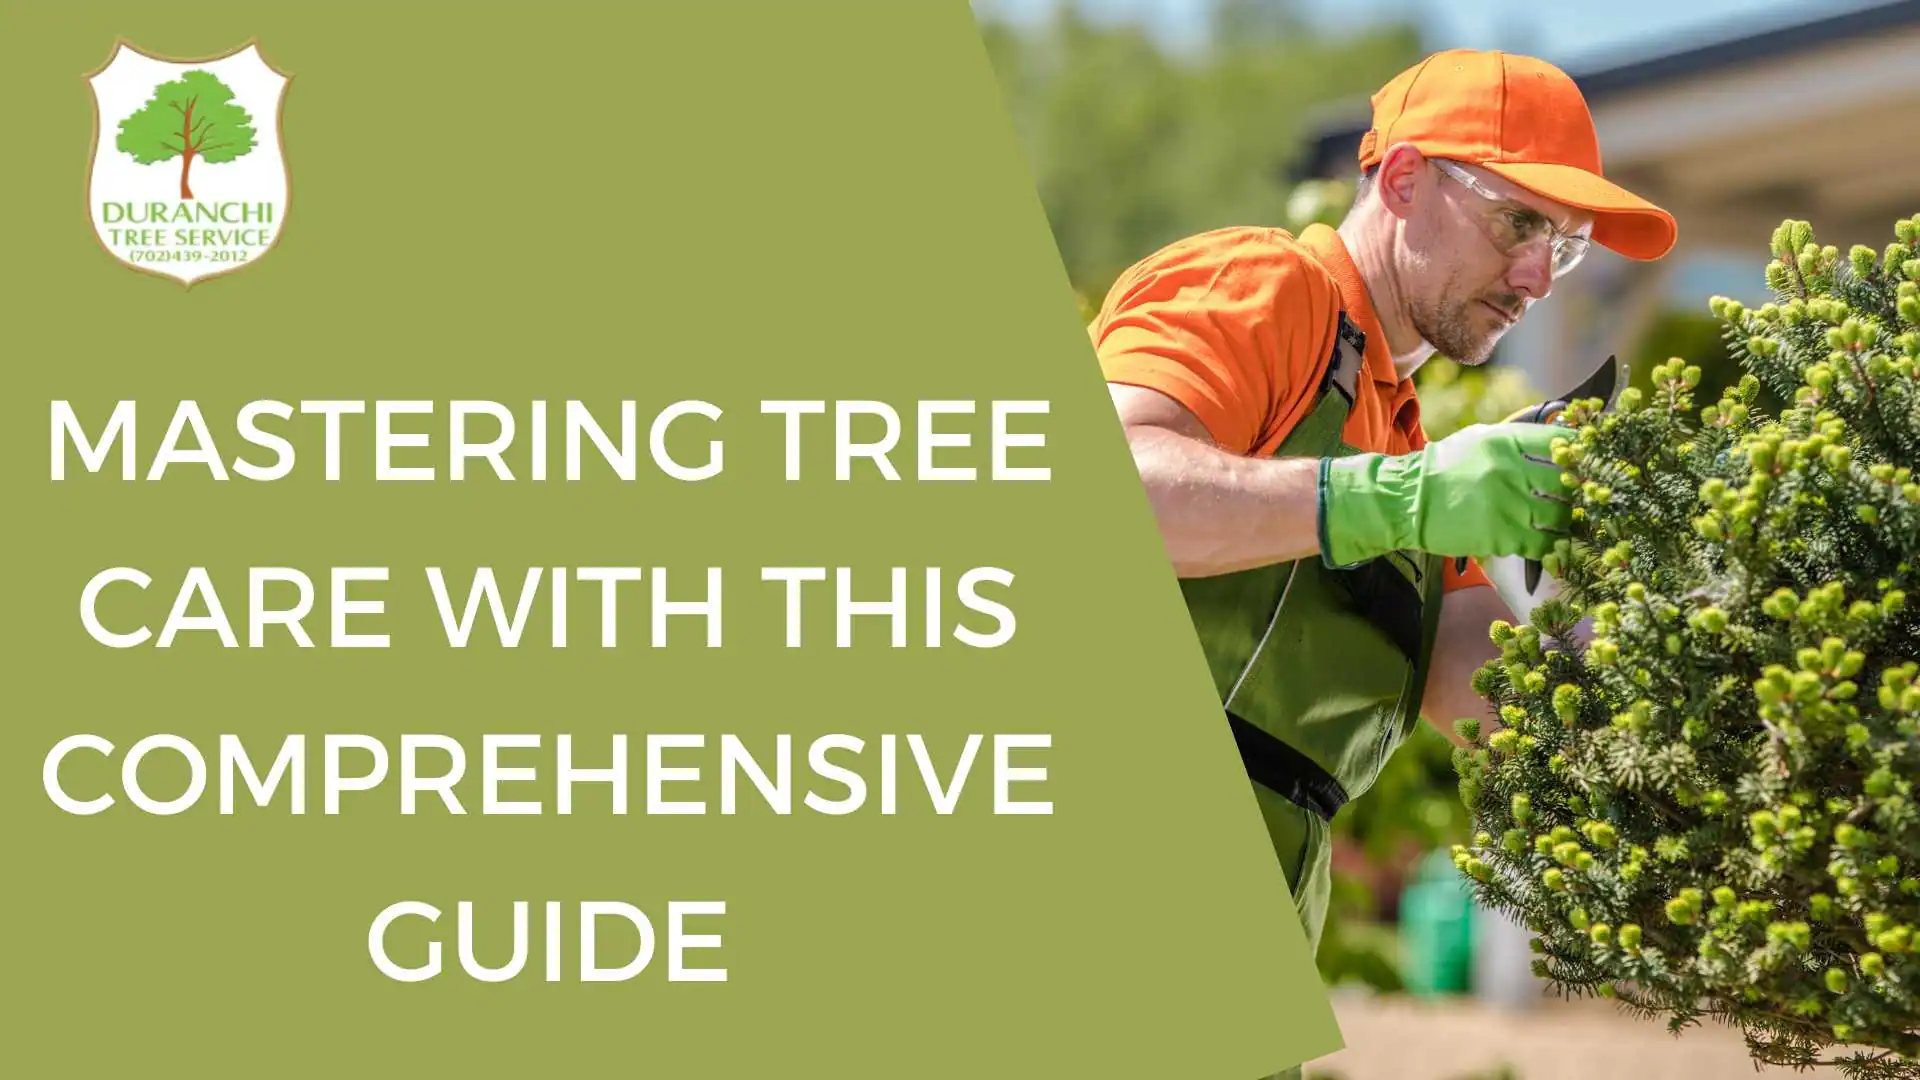 Your Green Oasis: Mastering Tree Care with this Comprehensive Guide